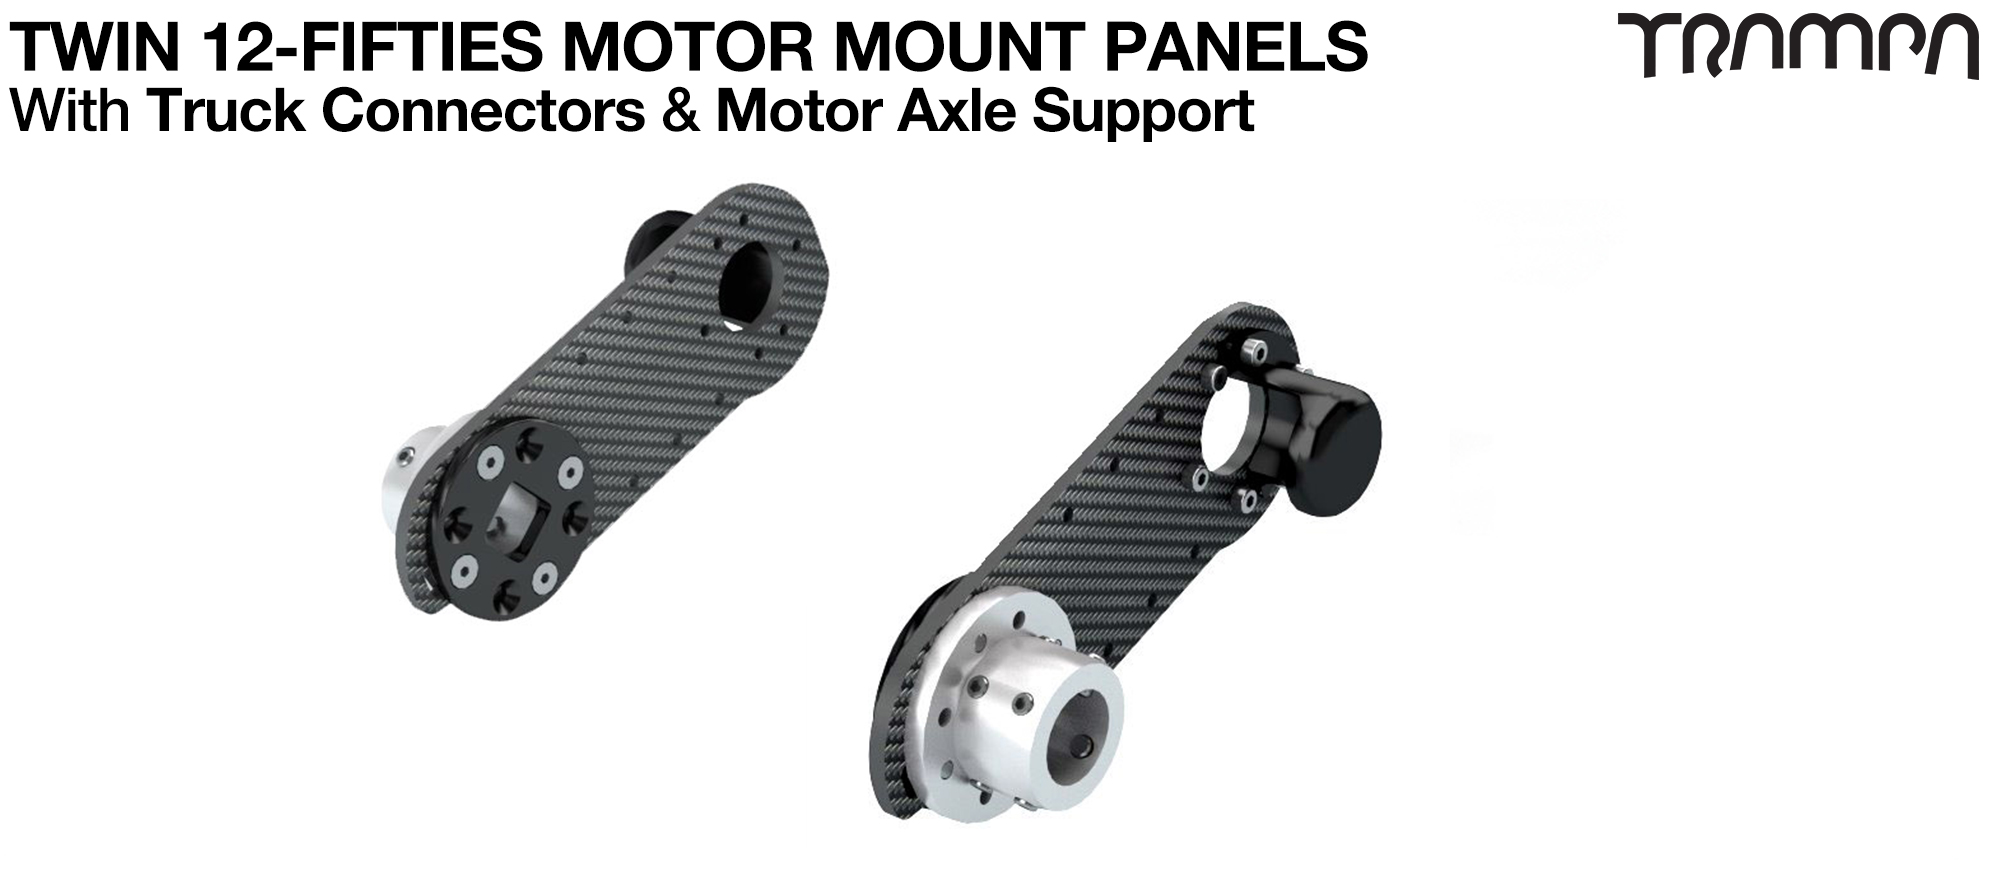 Original 12Fifties Truck Motor Mount Connector & Carbon Panel with Motor Axle support - TWIN